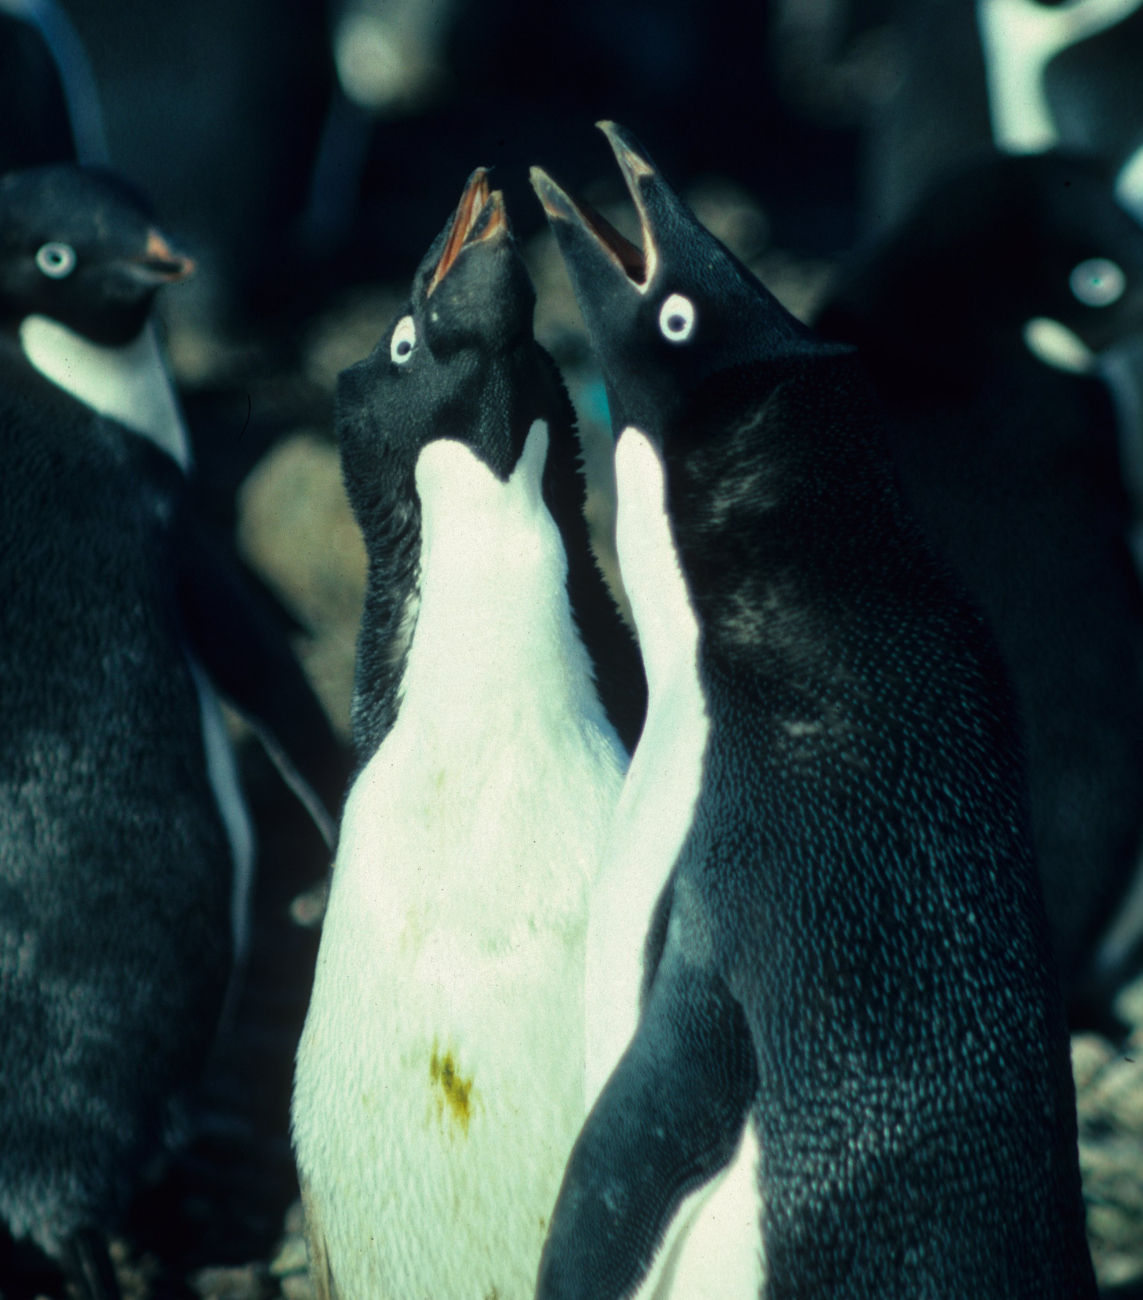 Territorial Adelie penguins confront each other near their nesting sites